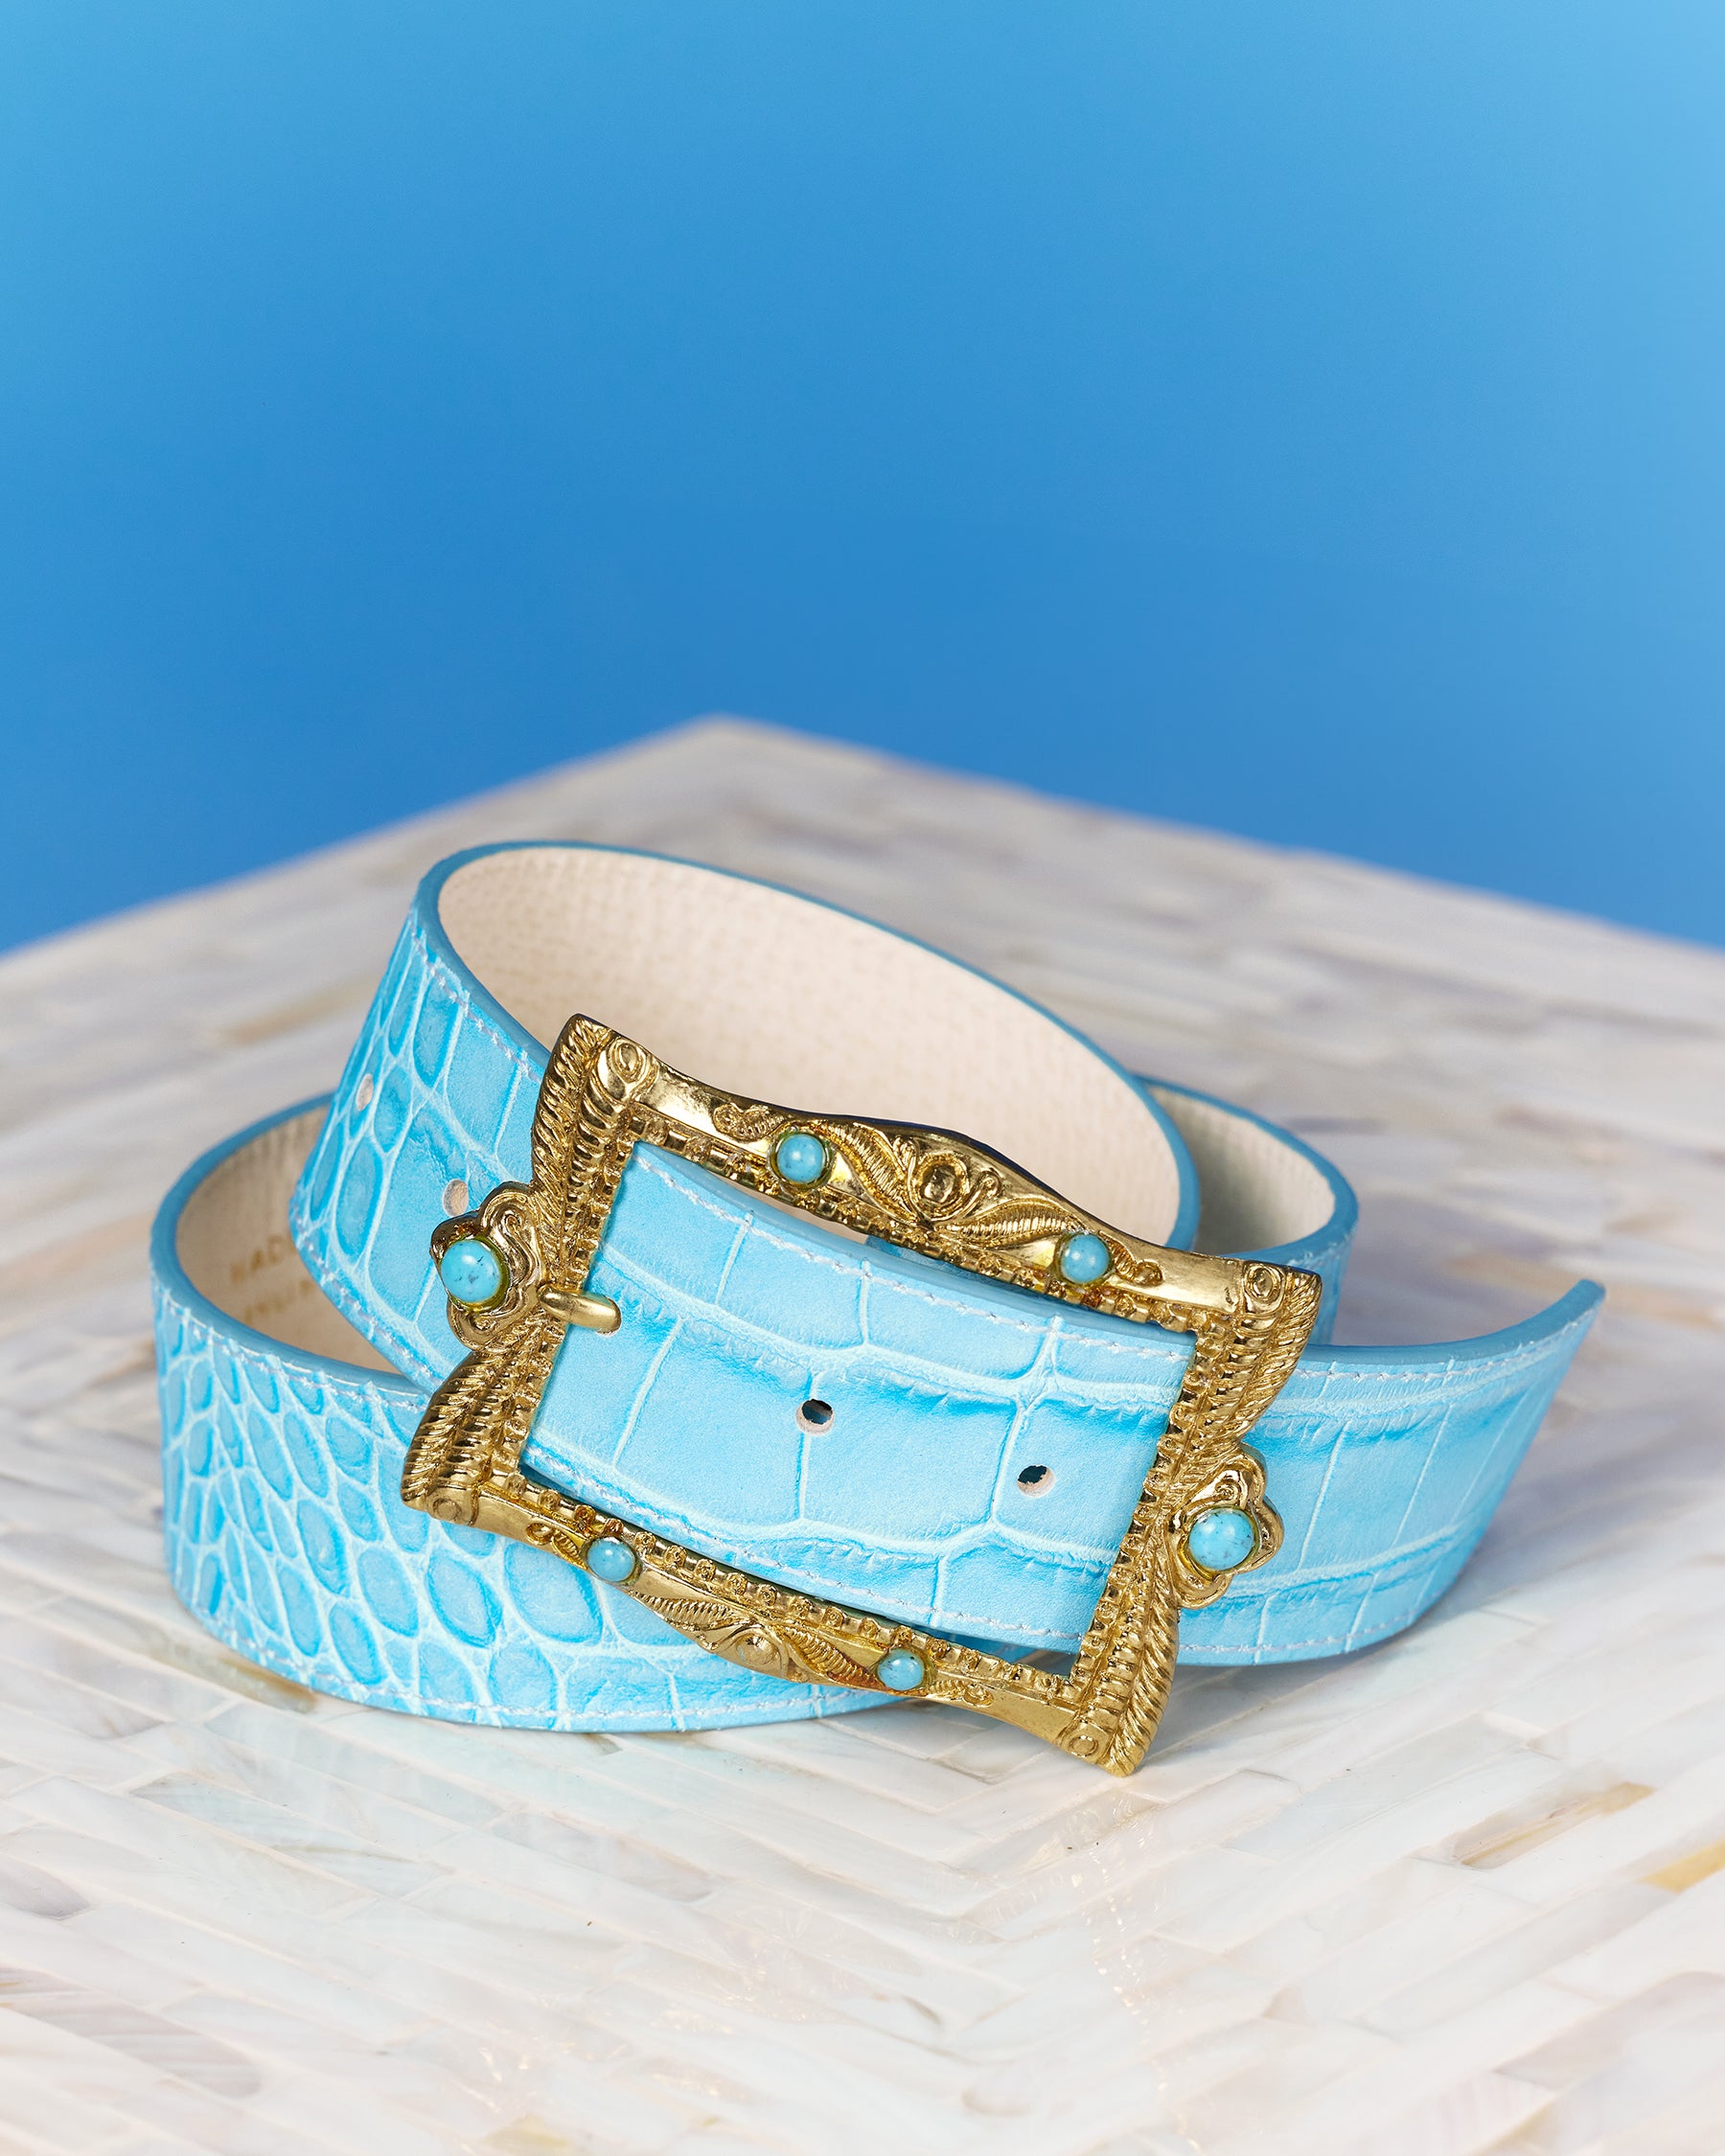 Blair Leather Belt in Croc-Embossed Turquoise-Displayed as a still life